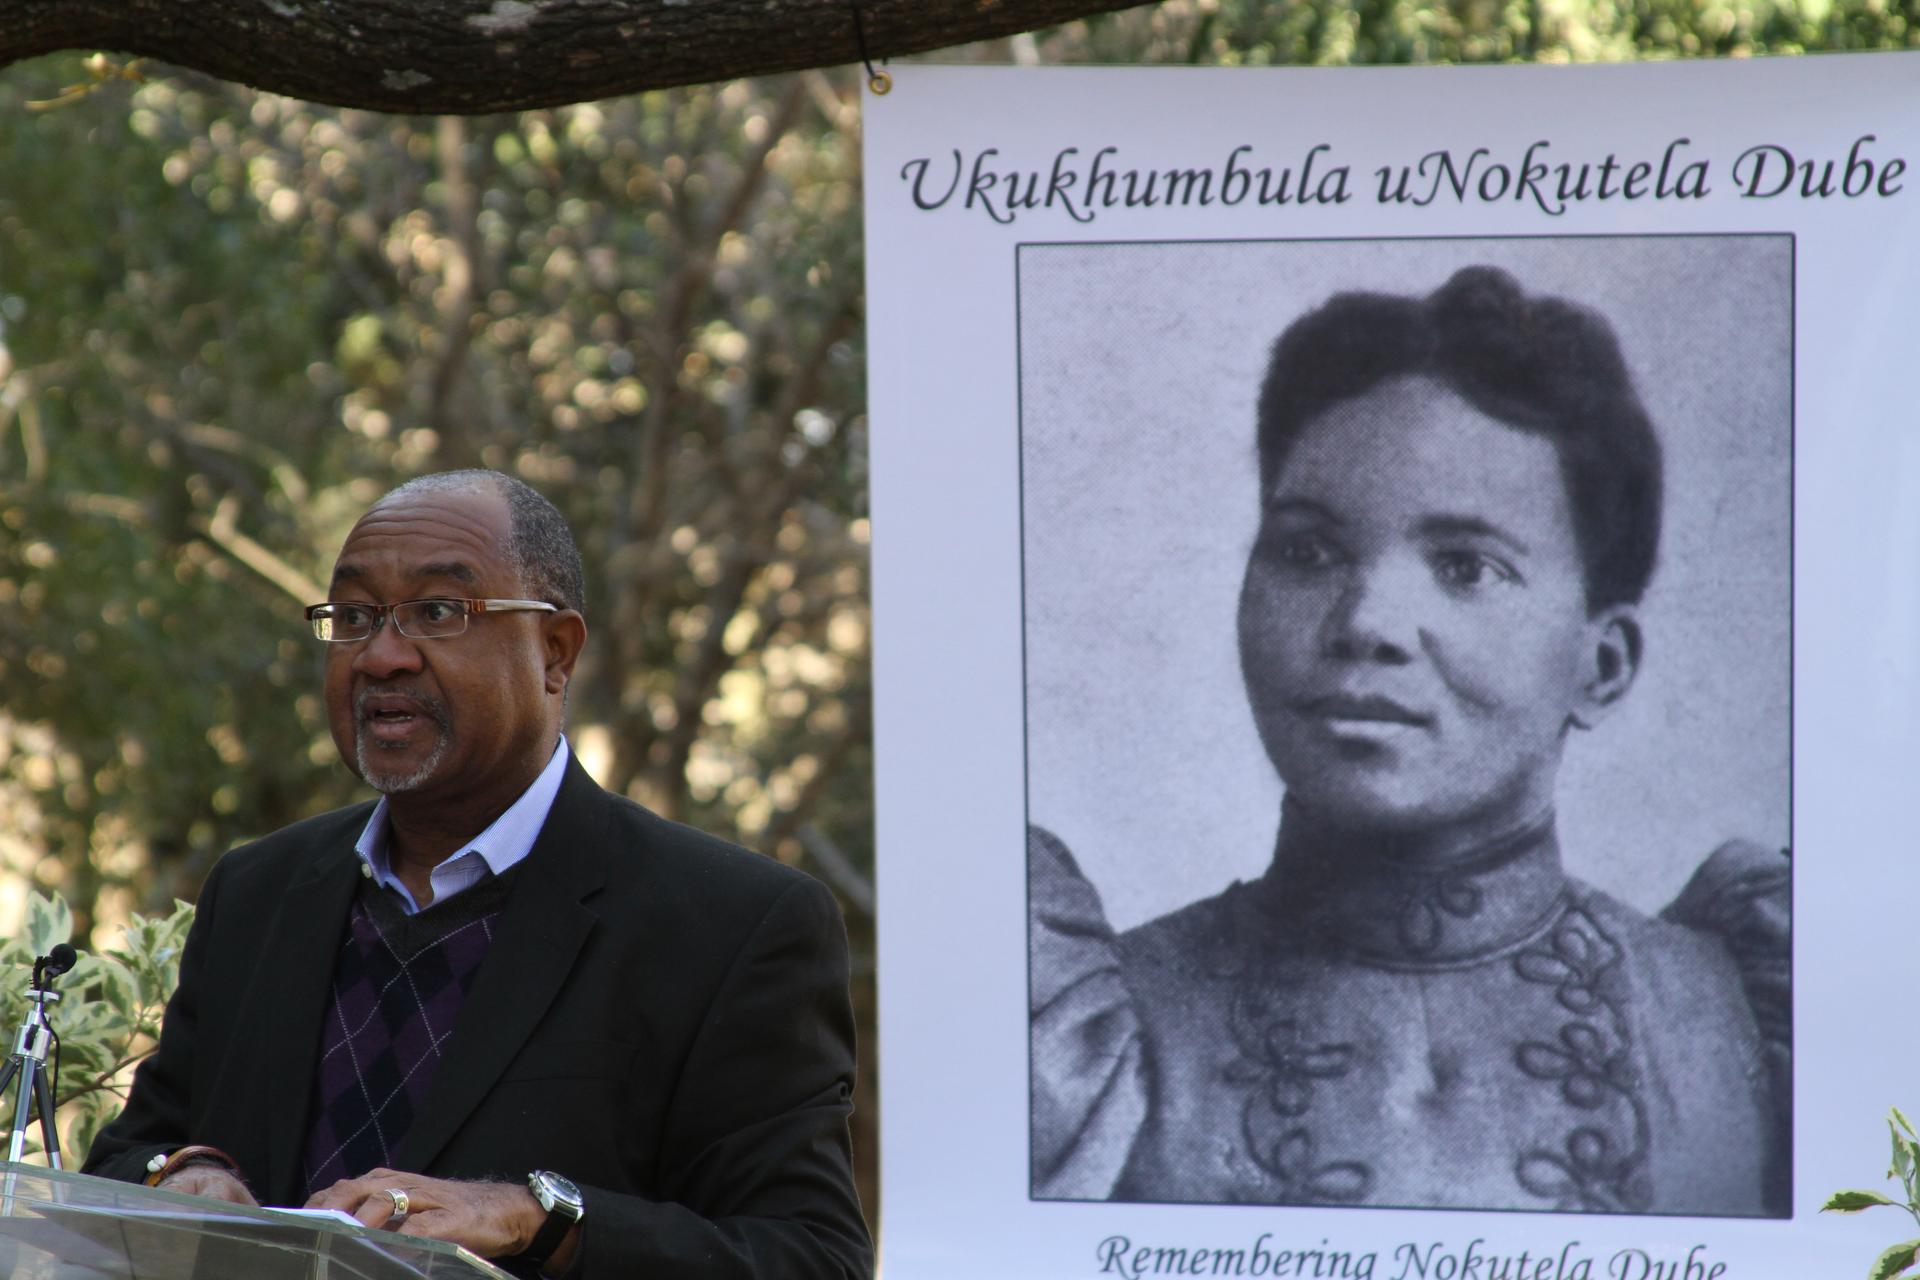 African scholar Cherif Keita of Carleton College next to a photo of  South African educator, journalist and political activist Nokutela Dube. Keita has produced a documentary about the wife of the founder of the African National Congress, called “Remember